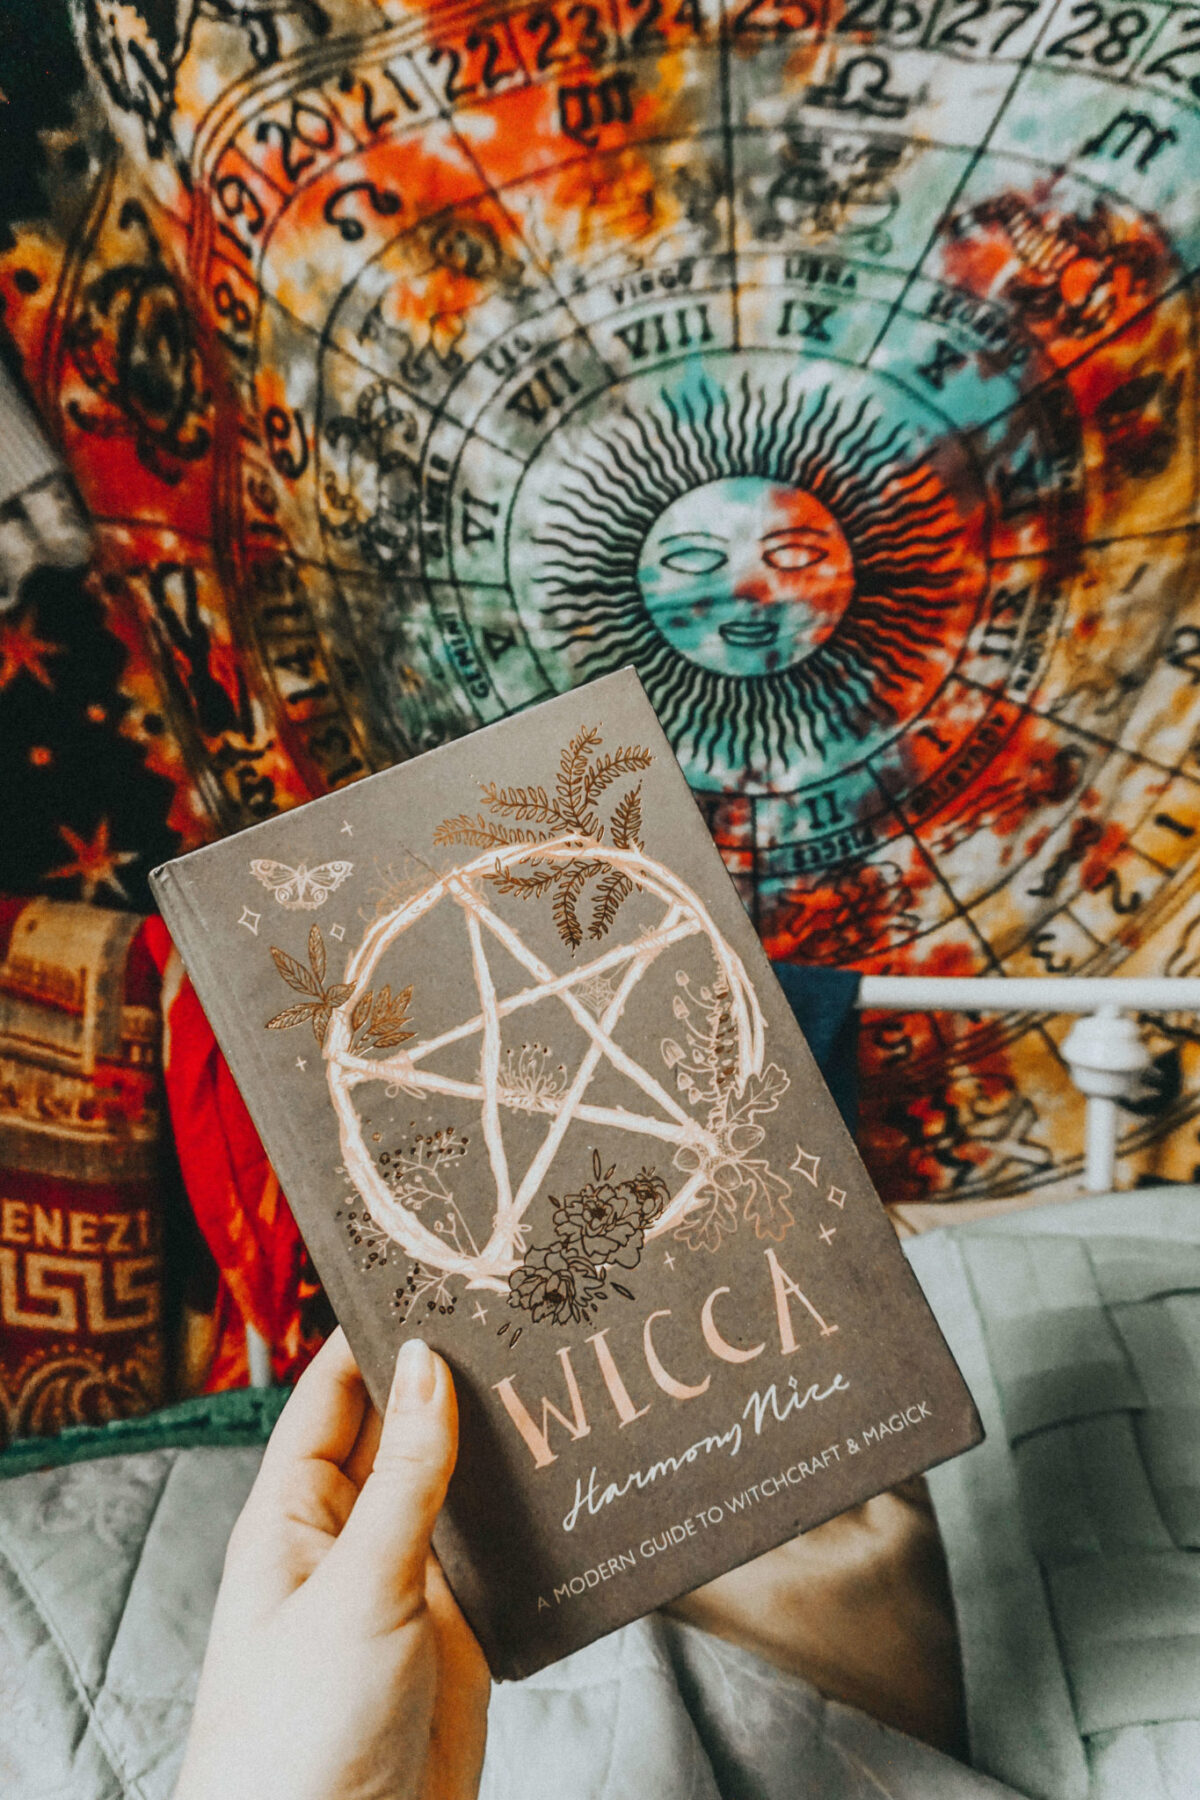 Wicca By Harmony Nice: A Modern Guide To Witchcraft and Magick.